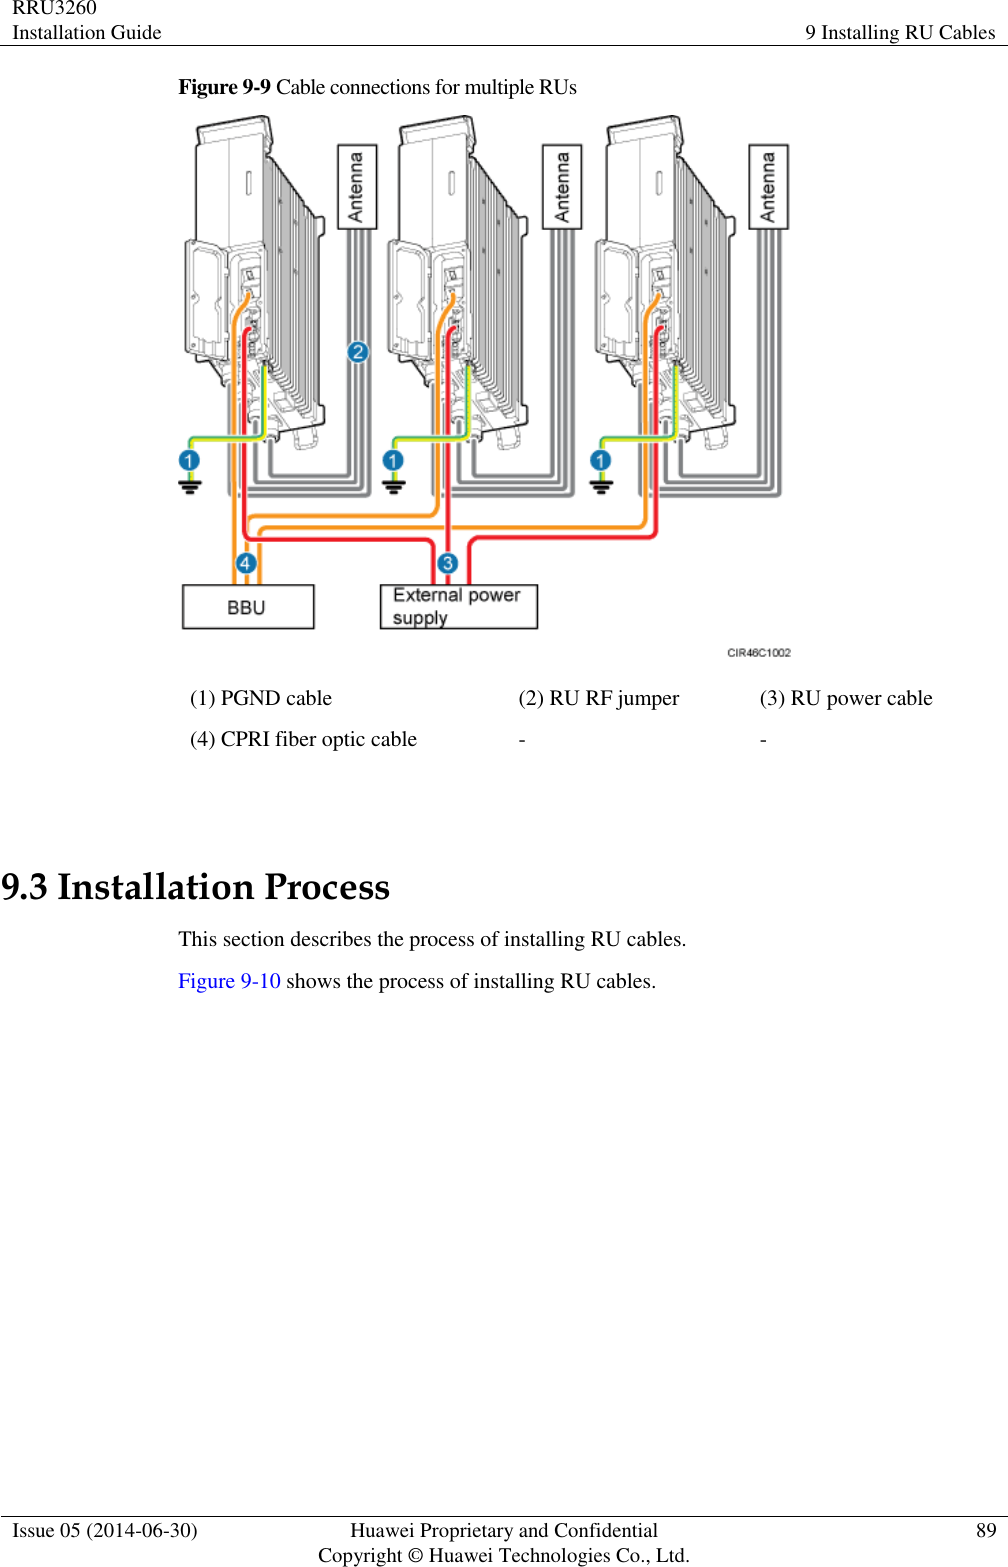 RRU3260 Installation Guide 9 Installing RU Cables  Issue 05 (2014-06-30) Huawei Proprietary and Confidential                                     Copyright © Huawei Technologies Co., Ltd. 89  Figure 9-9 Cable connections for multiple RUs  (1) PGND cable (2) RU RF jumper (3) RU power cable (4) CPRI fiber optic cable - -  9.3 Installation Process This section describes the process of installing RU cables. Figure 9-10 shows the process of installing RU cables. 